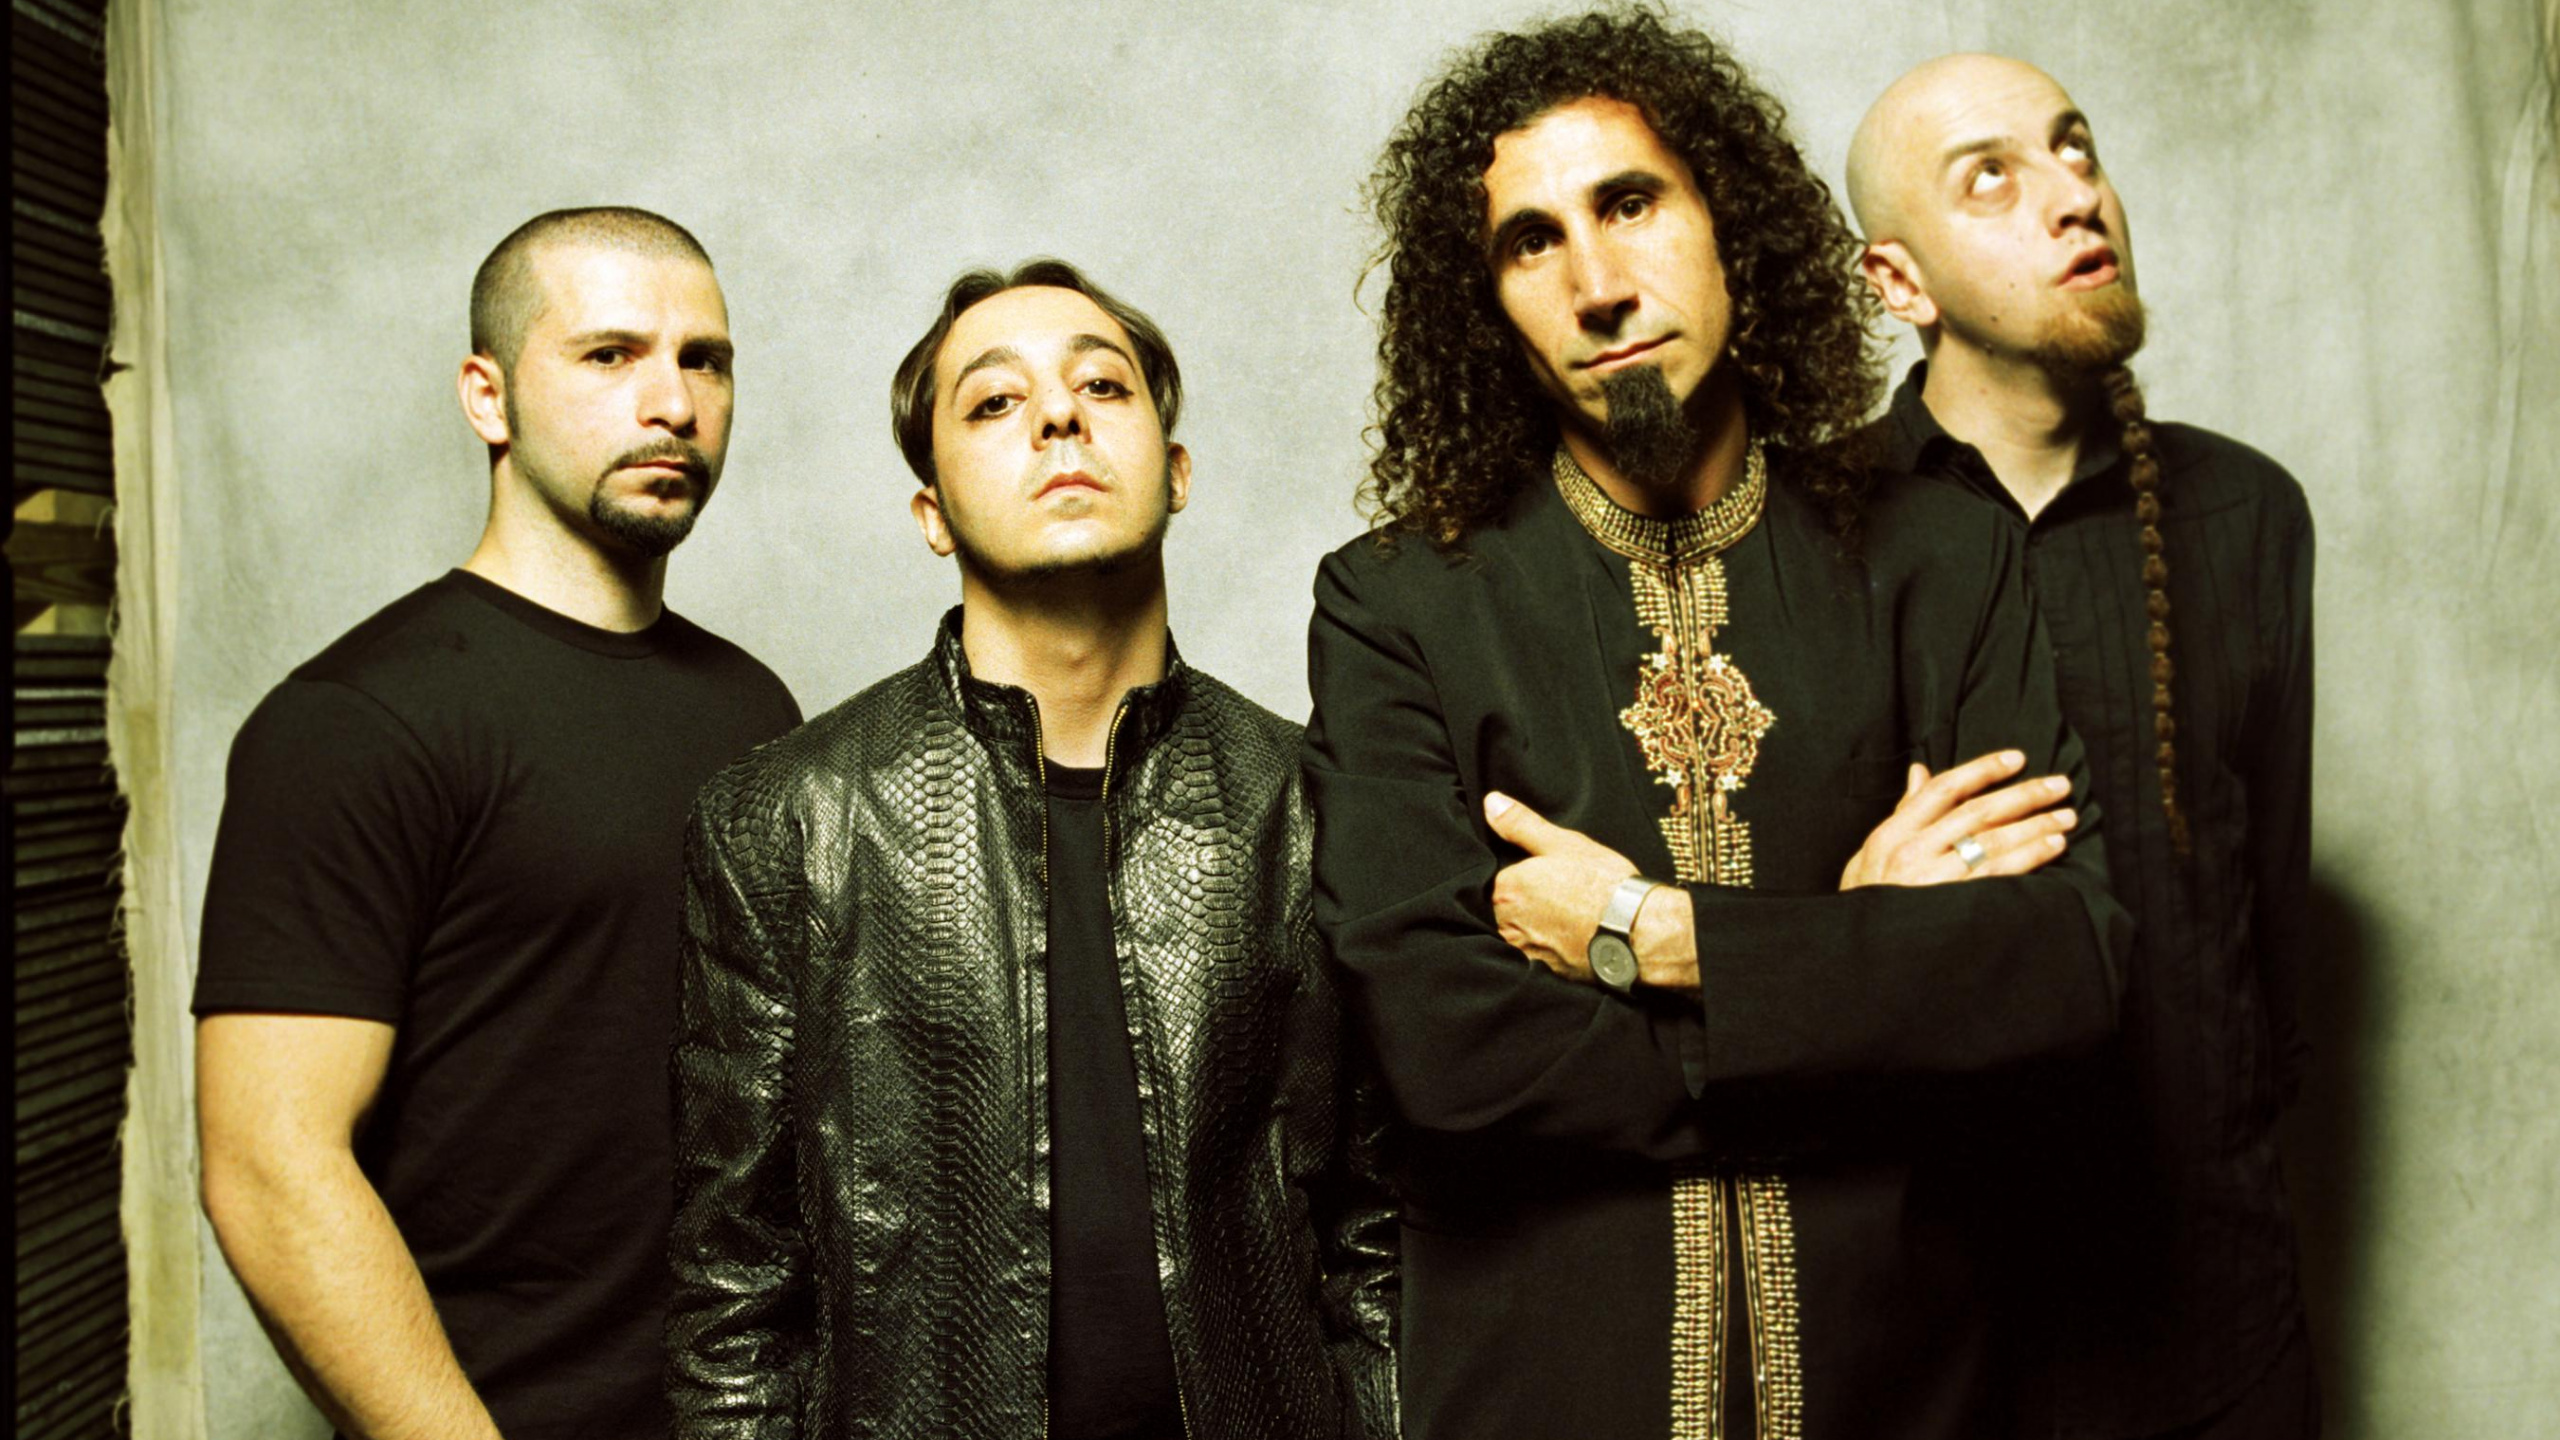 System Of A Down, Heavy Metal, Social Group, Fun, Event. Wallpaper in 2560x1440 Resolution